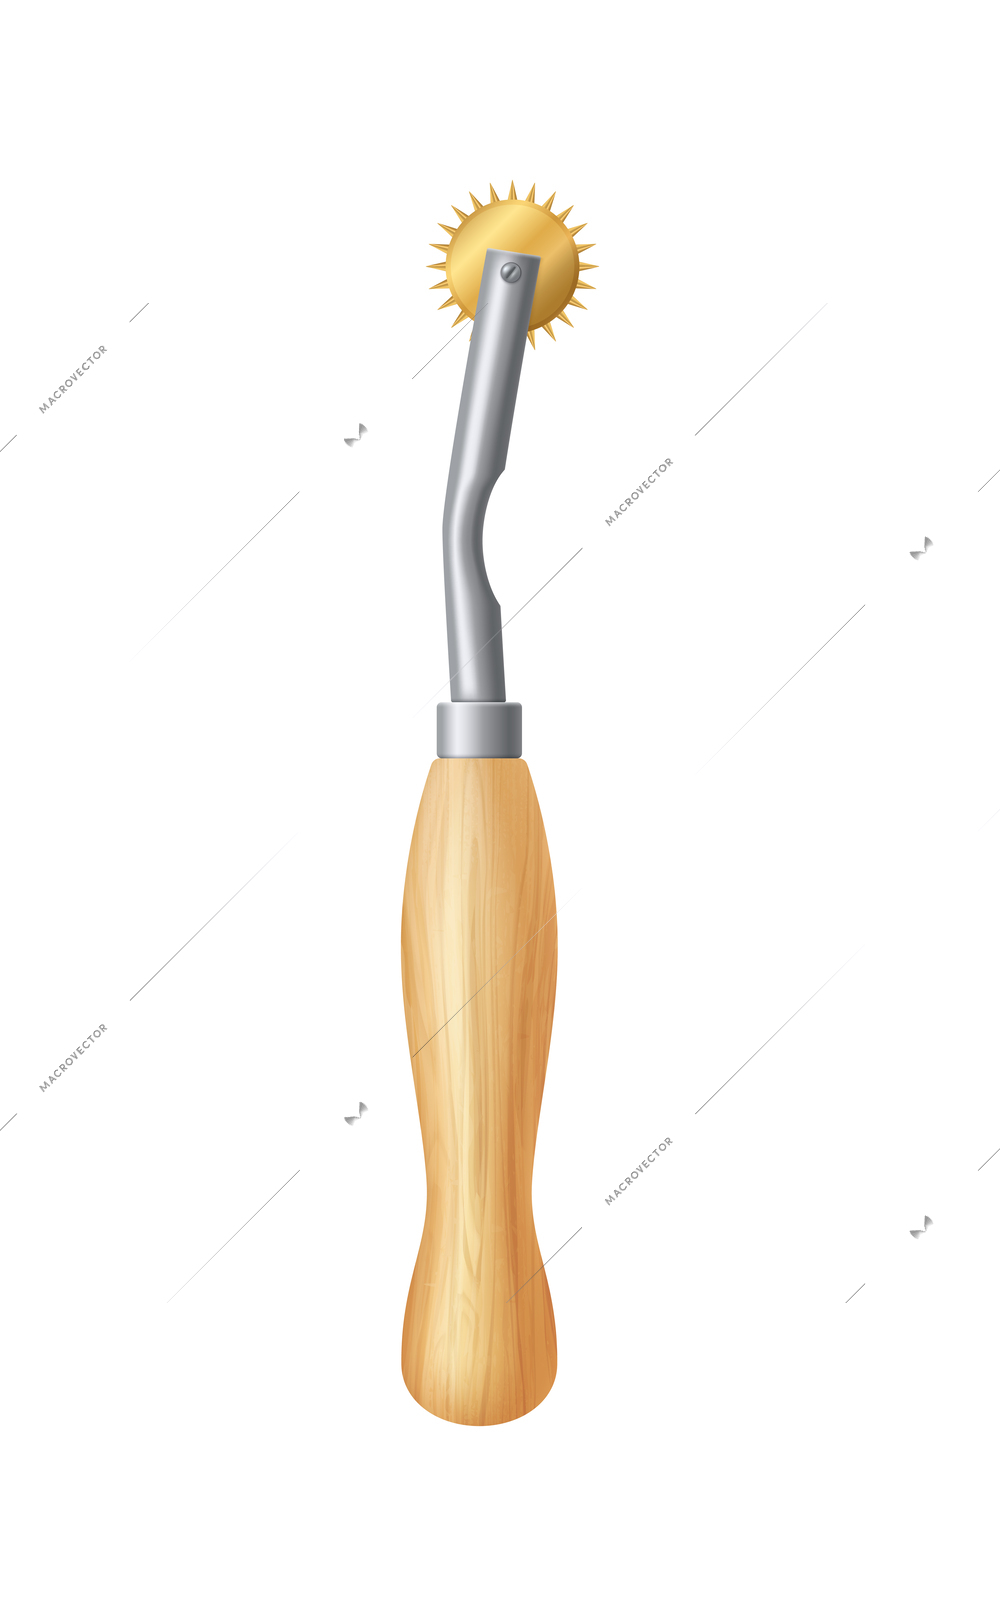 Realistic tracing wheel sewing tool vector illustration